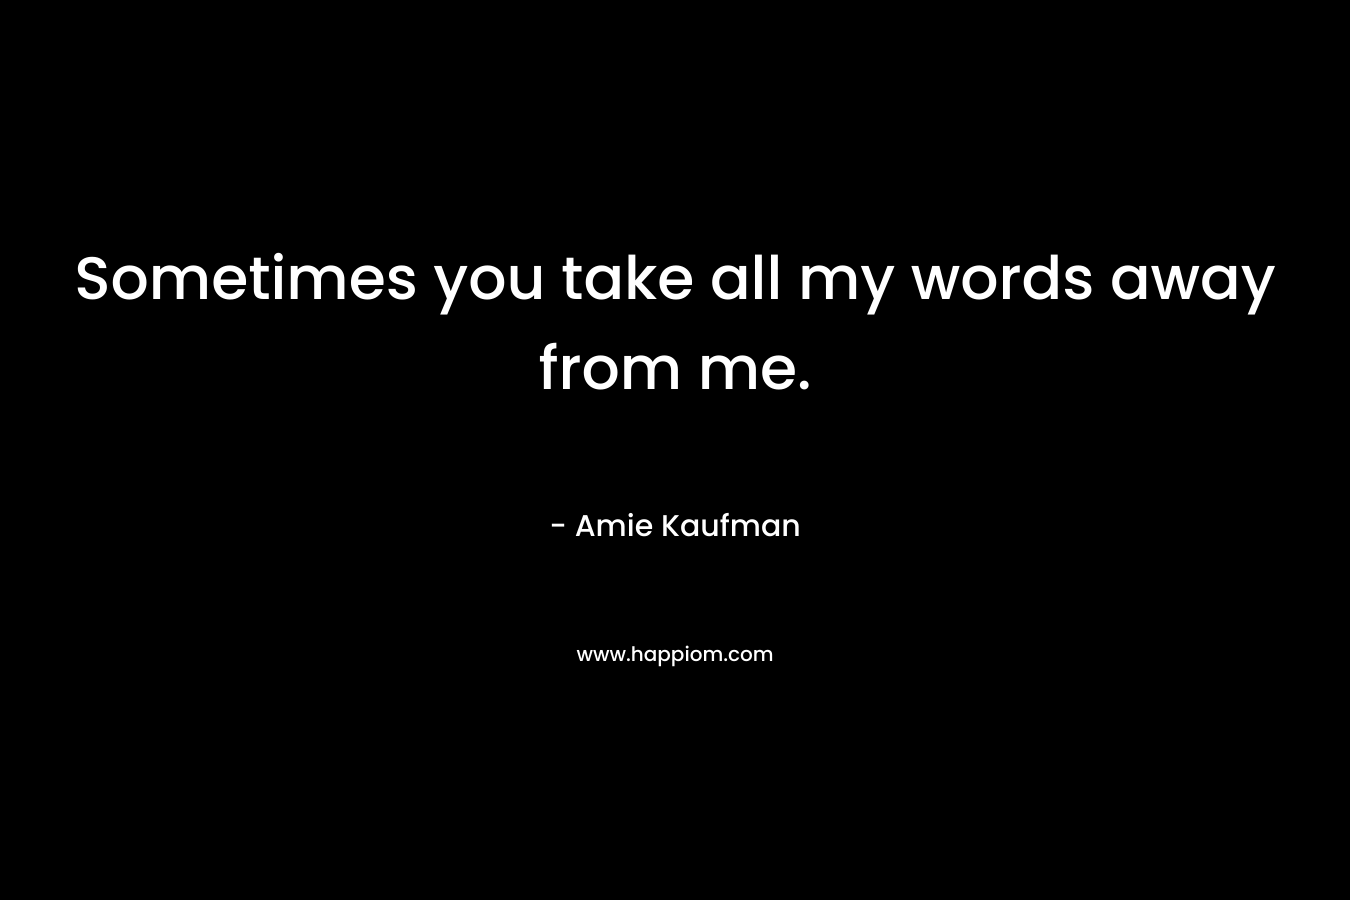 Sometimes you take all my words away from me.